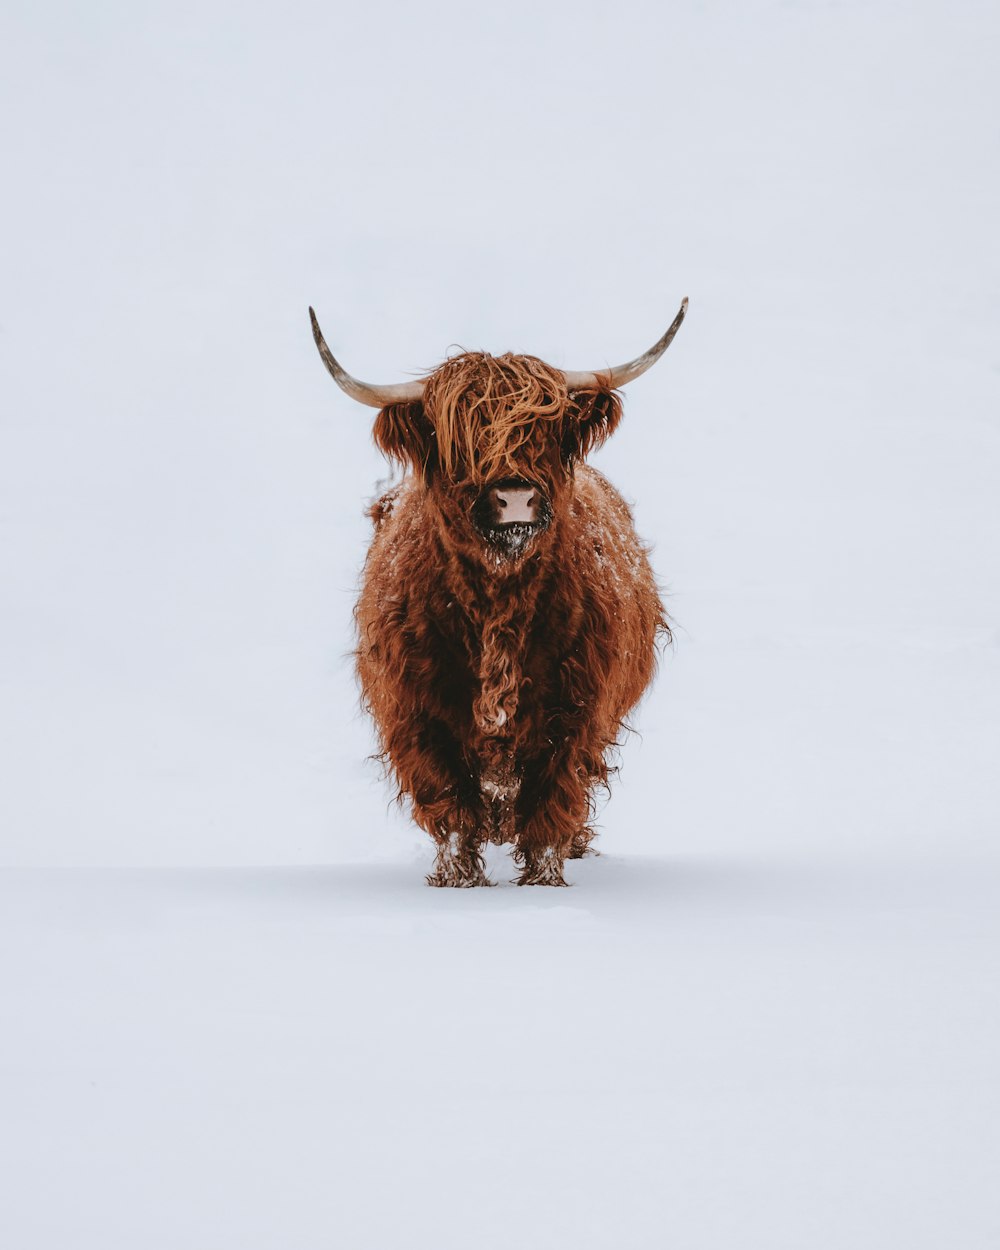 100+ Highland Cow Pictures | Download Free Images on Unsplash